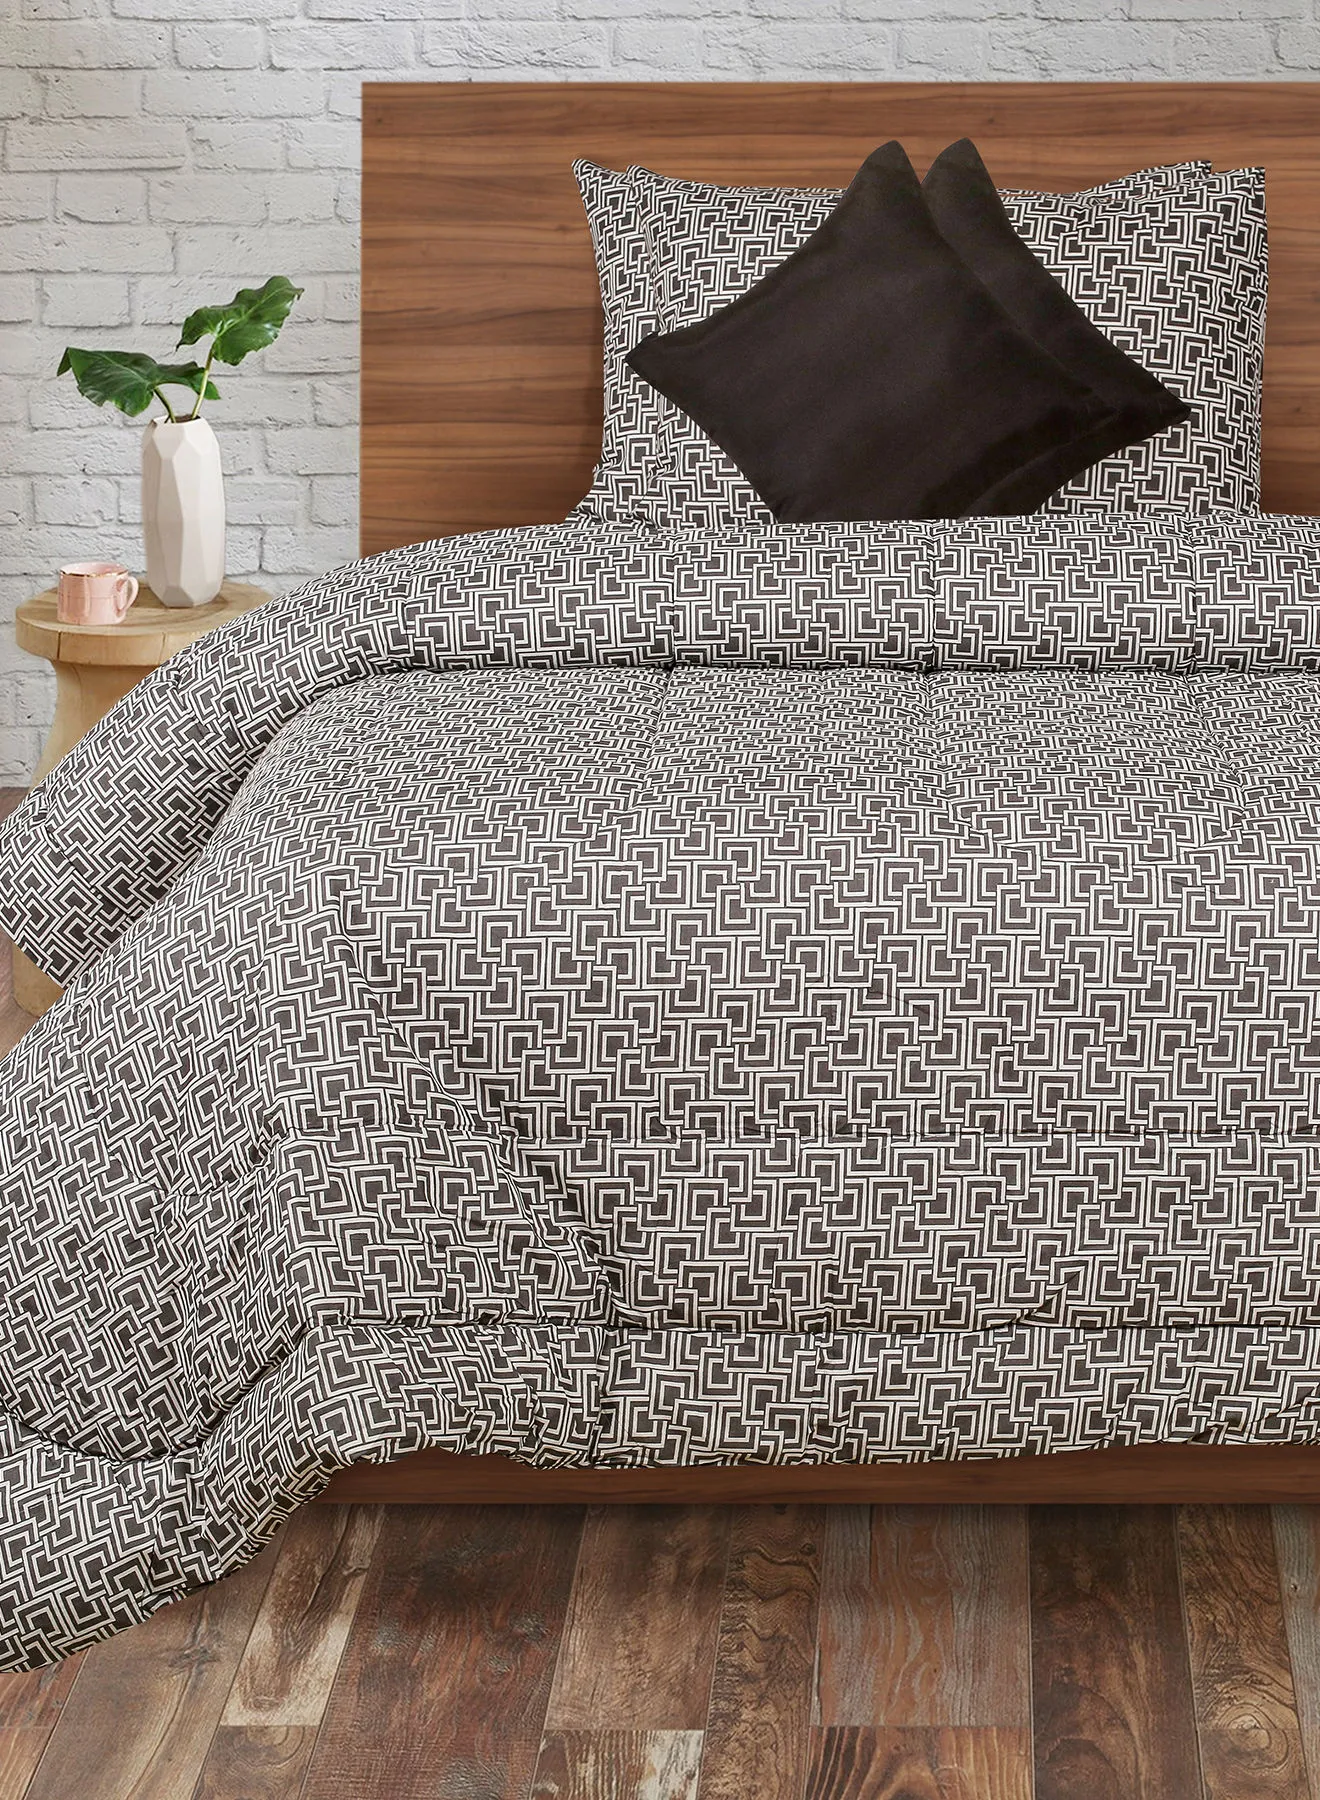 Amal Comforter Set King Size All Season Everyday Use Bedding Set 100% Cotton 5 Pieces 1 Comforter 2 Pillow Covers 2 Cushion Covers Grey/Brown